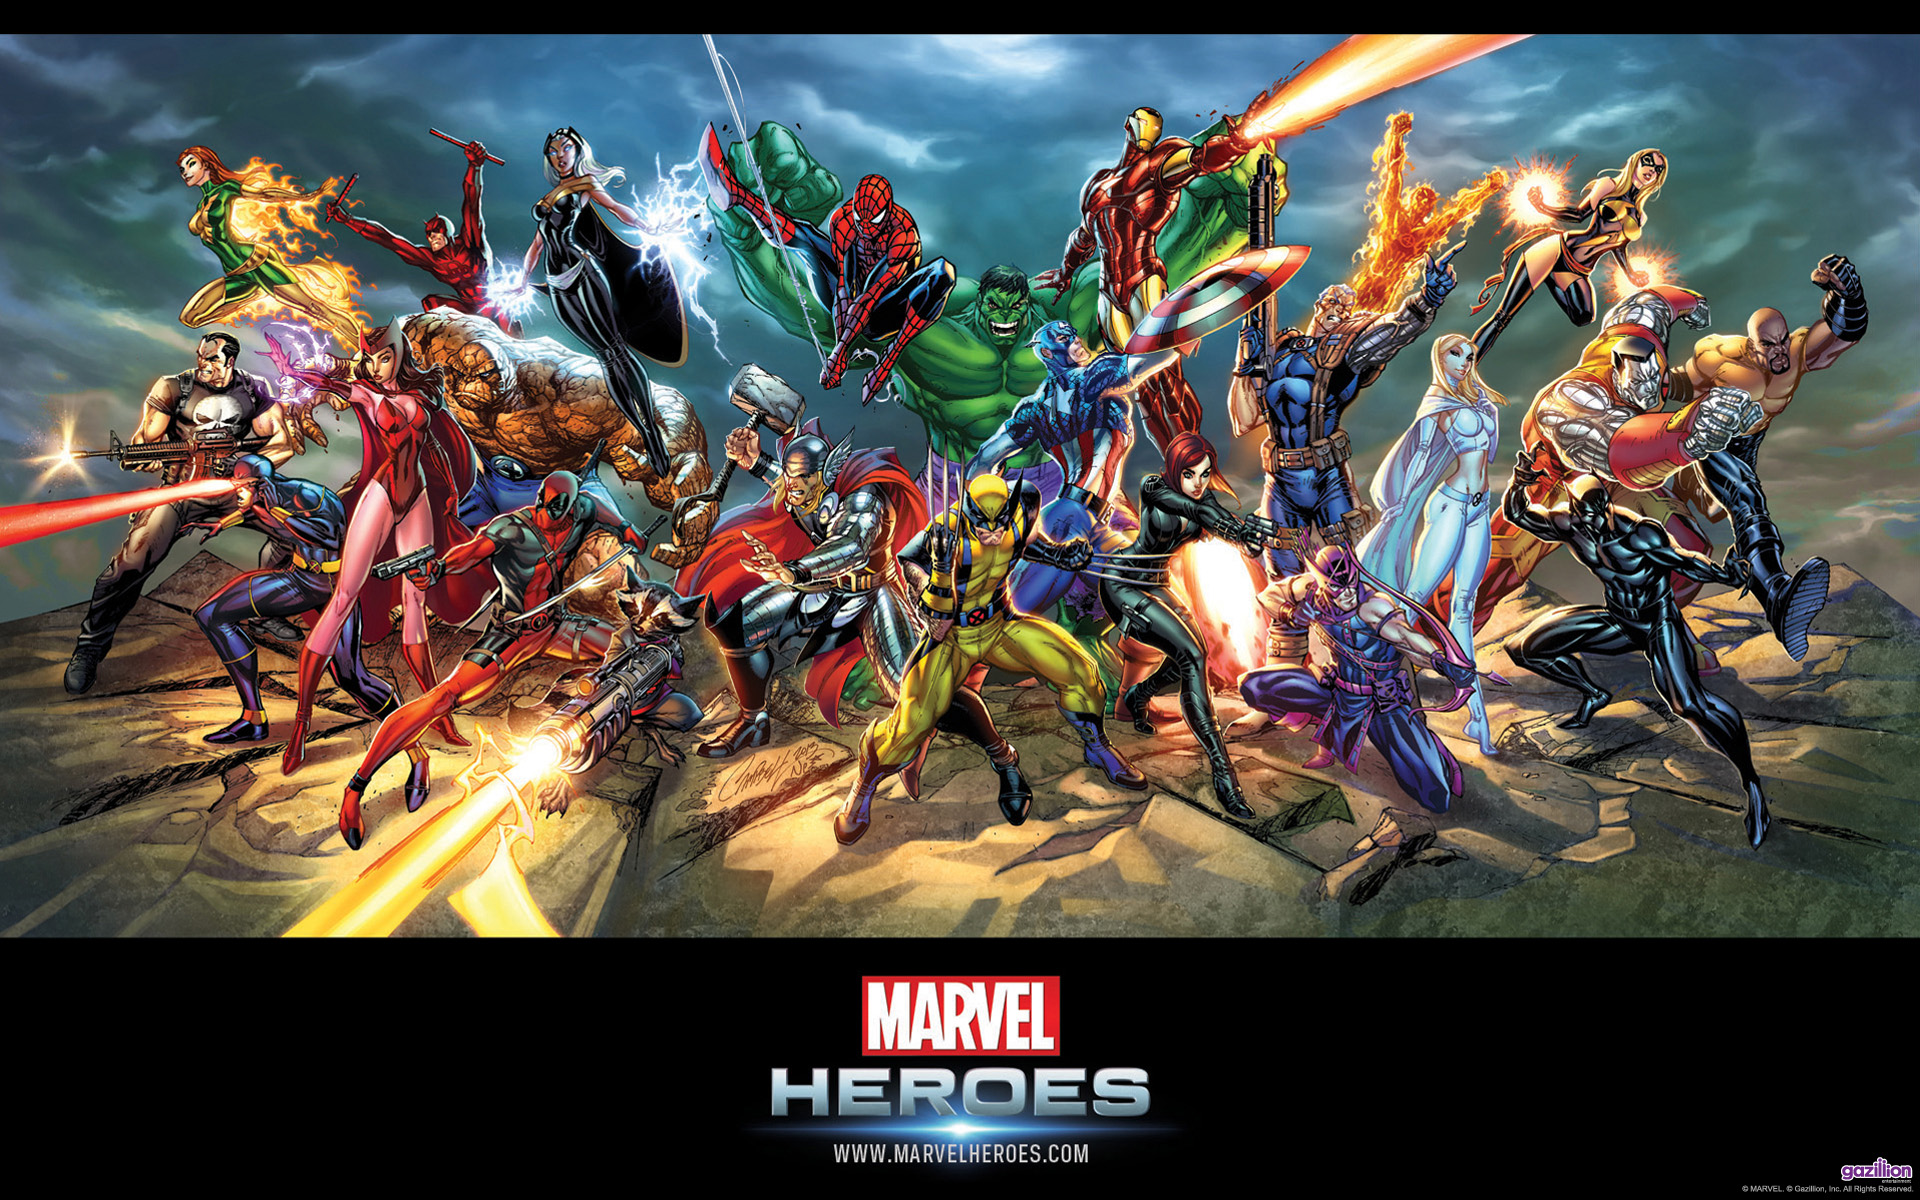 marvel superheroes hd wallpapers,action adventure game,strategy video game,pc game,mythology,games